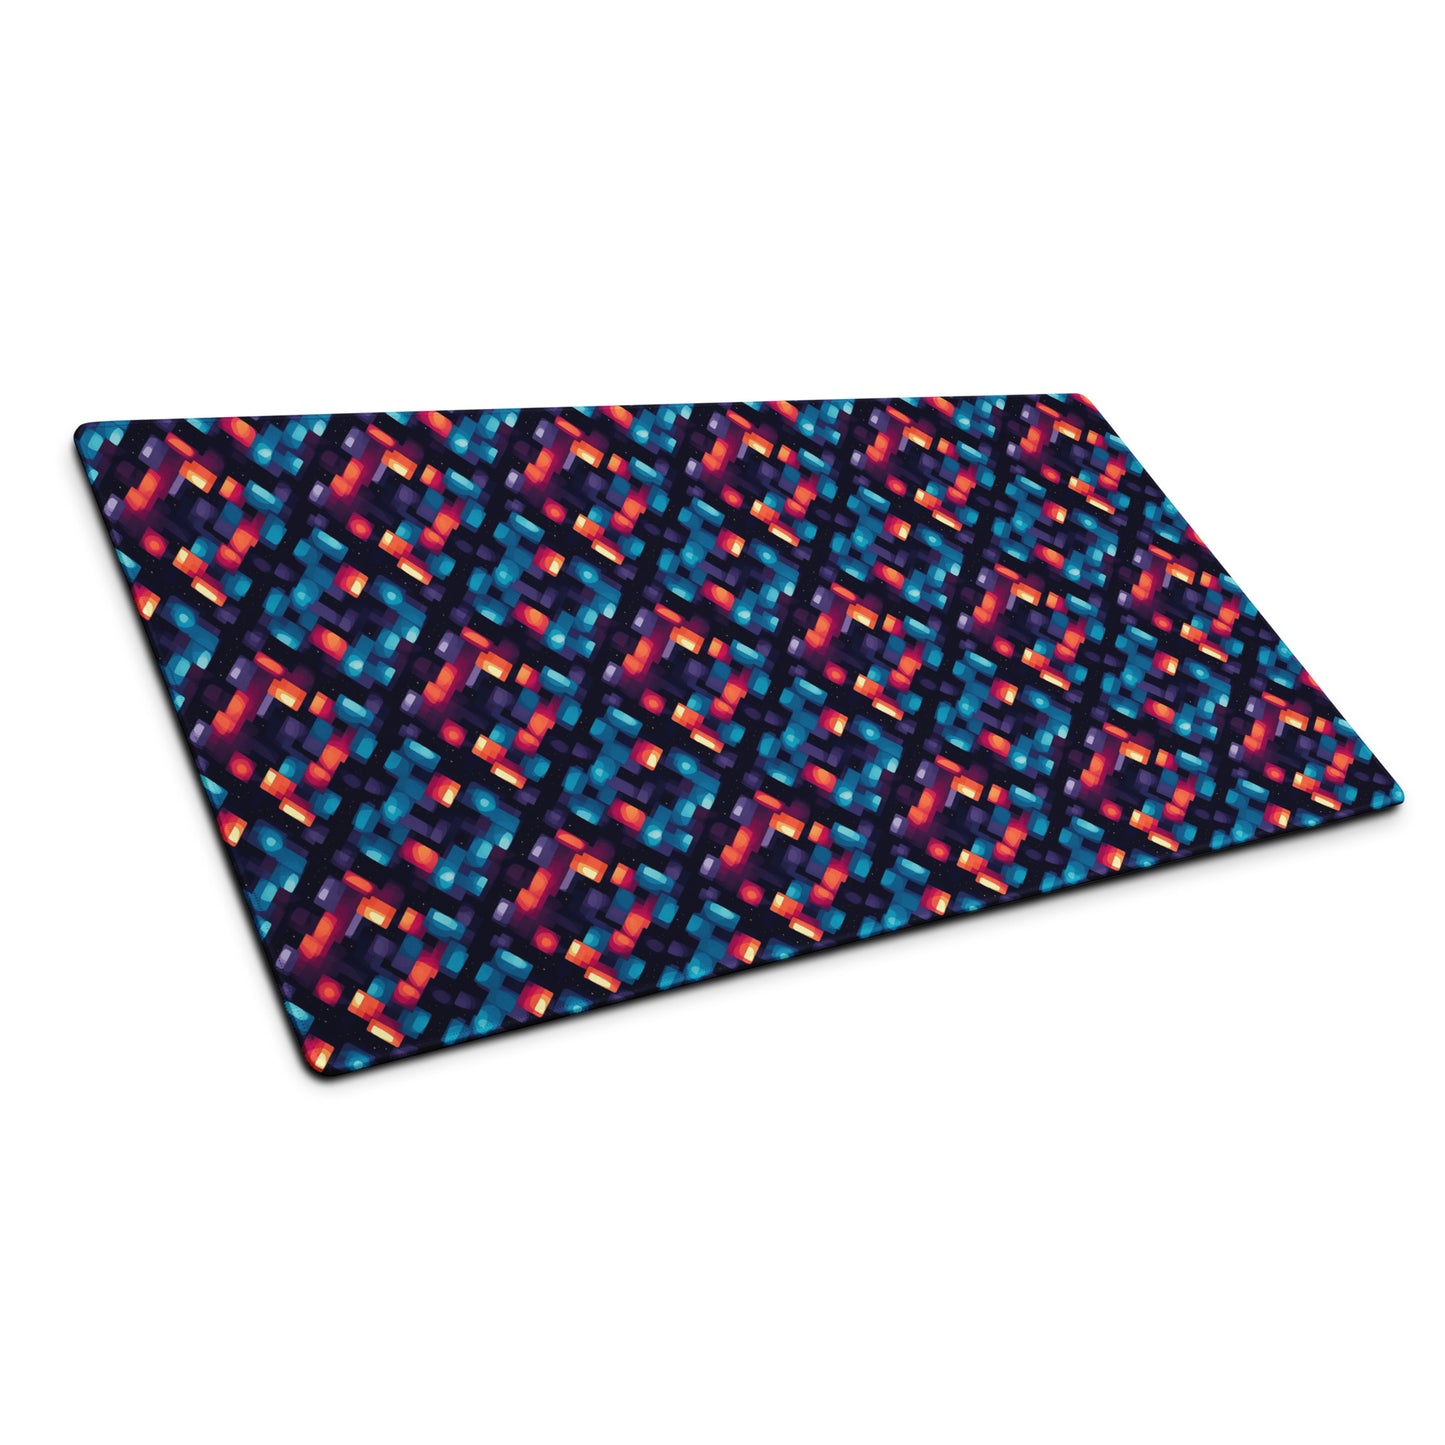 alt text- A 36" x 18" desk pad with blue and orange abstract pattern sitting at an angle.